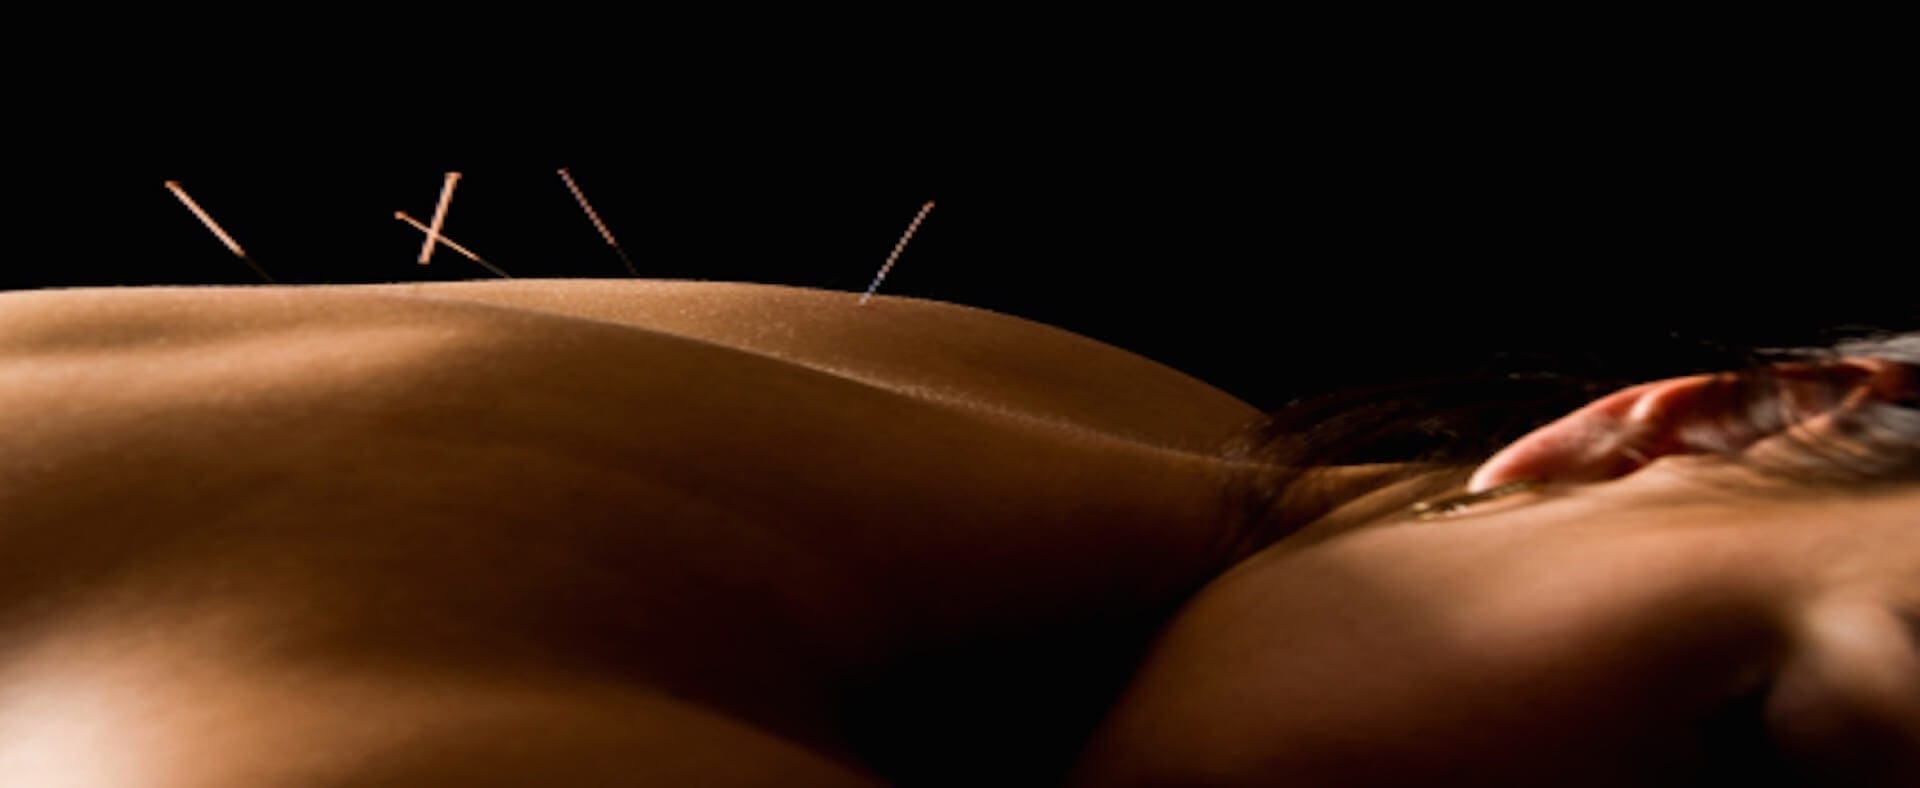  Acupuncture: The Ancient Asian Art of Healing | Dr. Jiwani Naturopathic Vancouver Burnaby Surrey